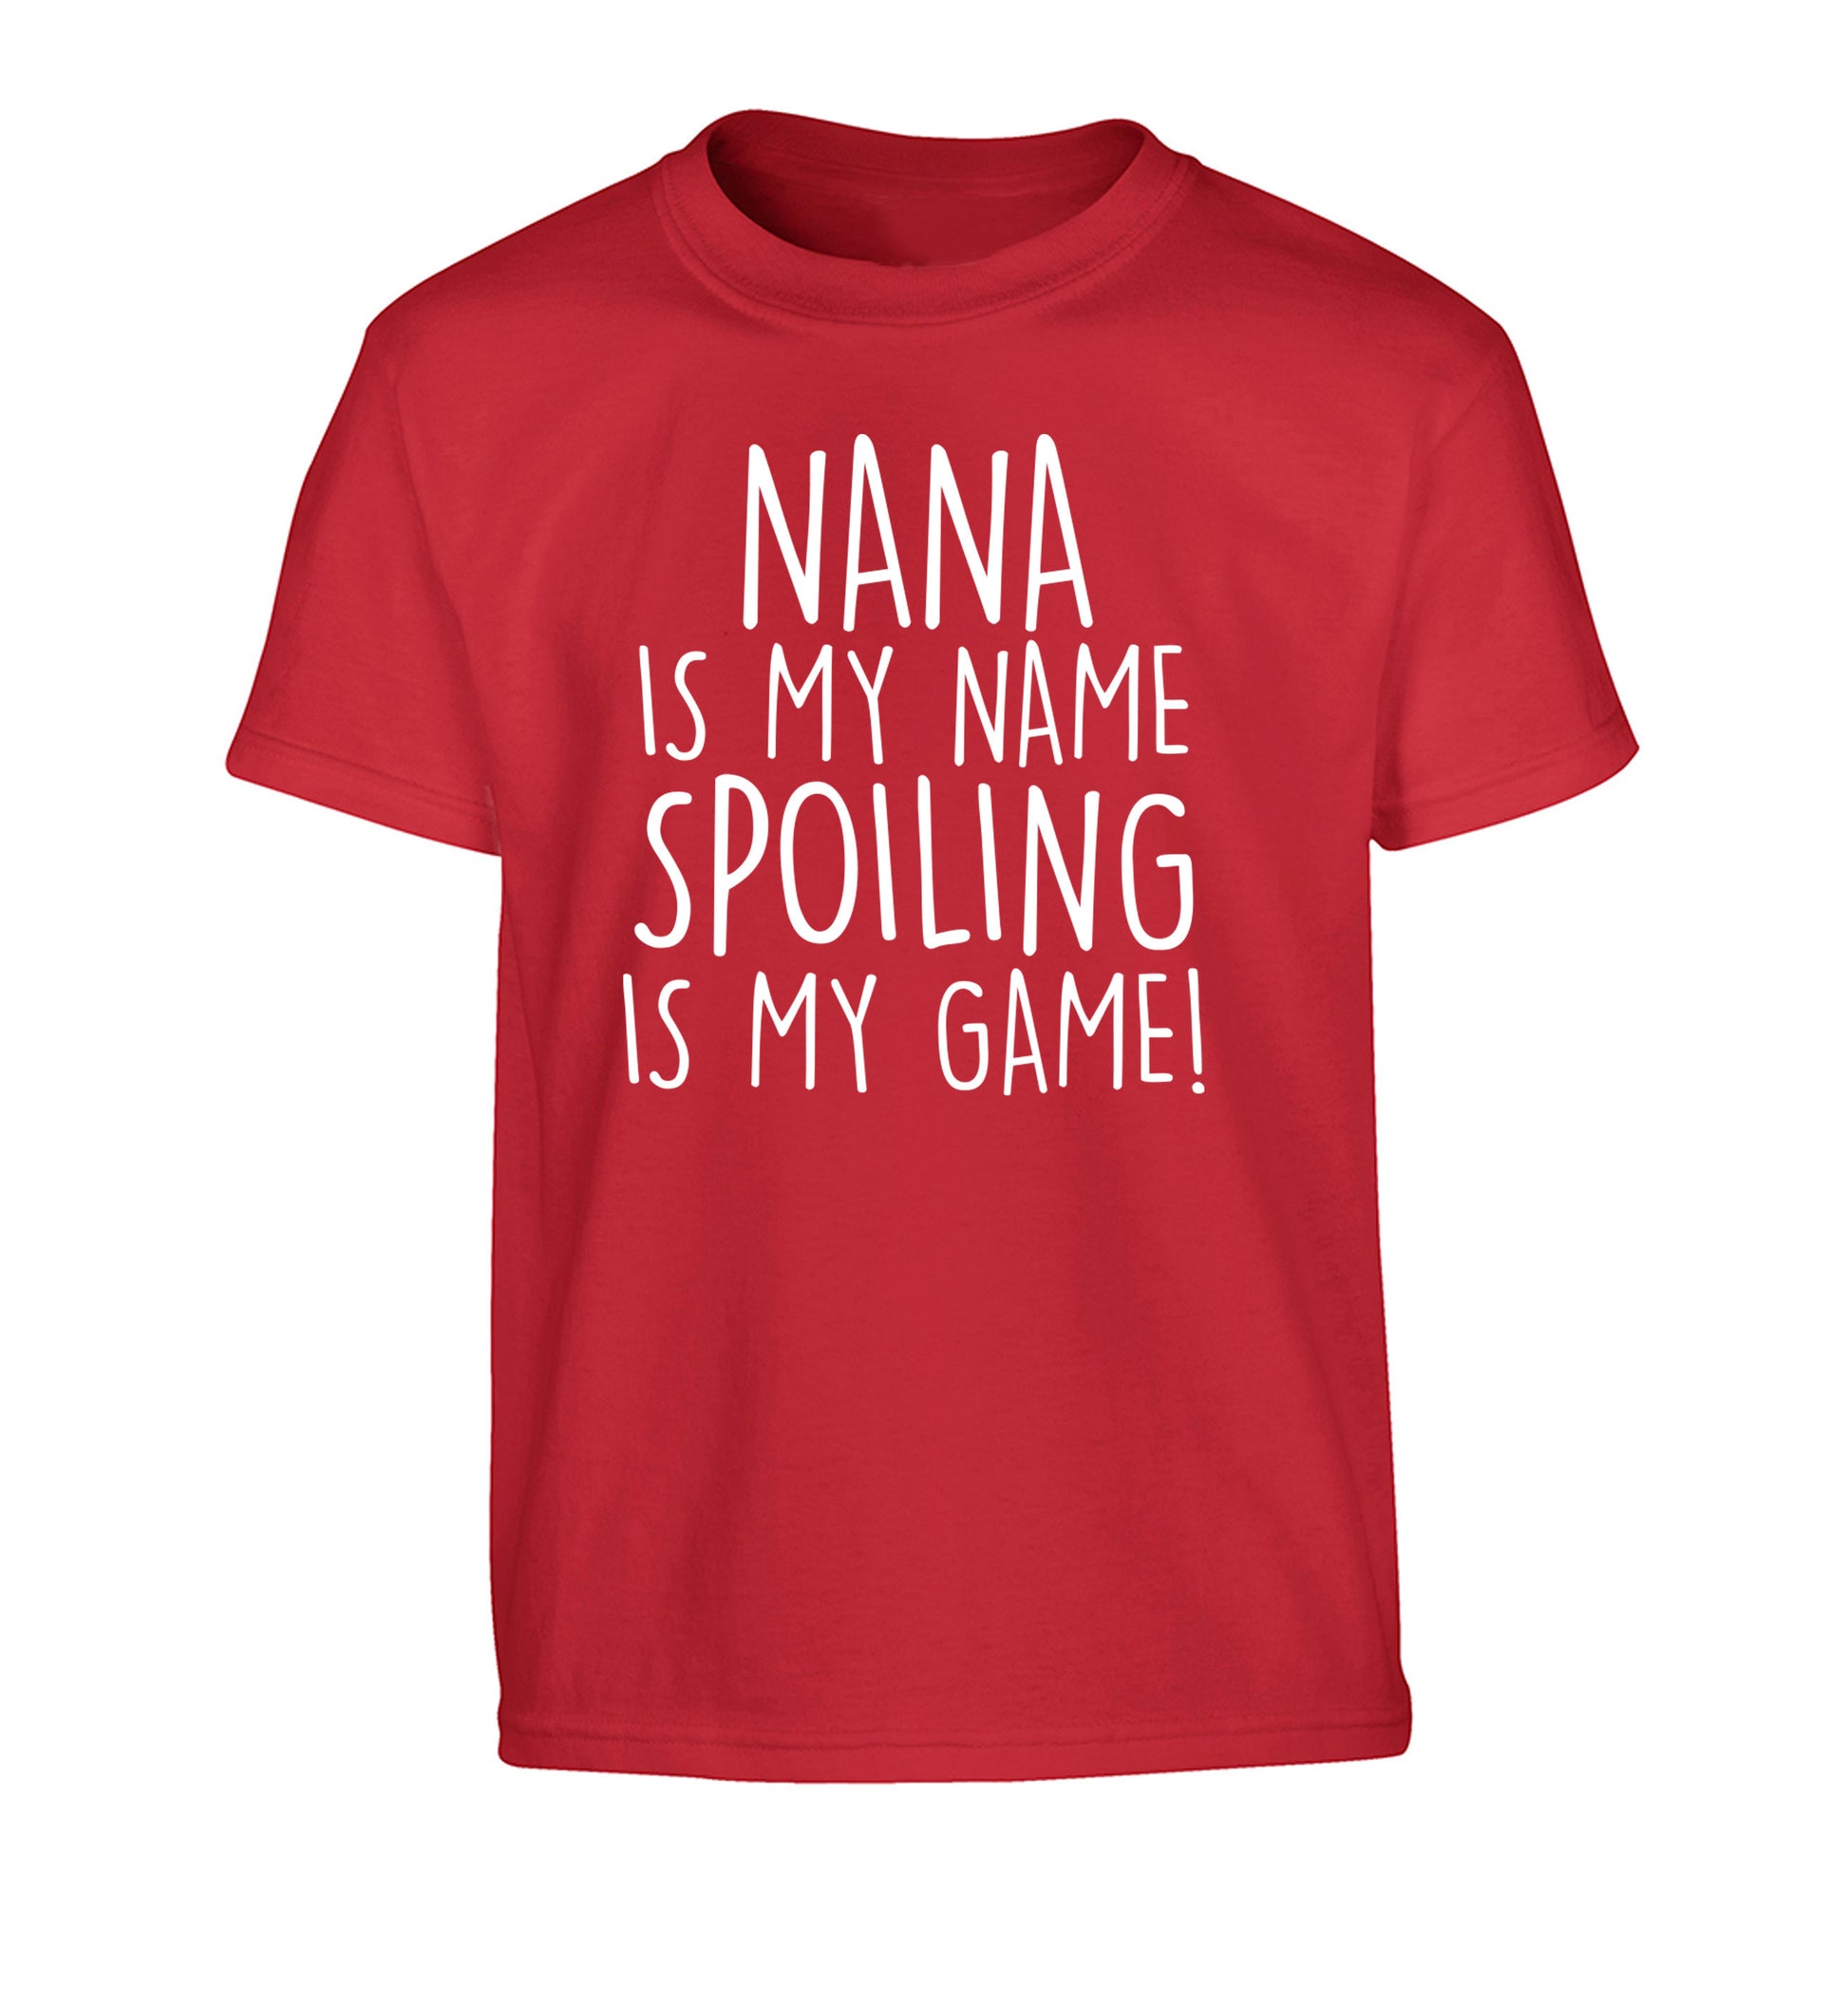 Nana is my name, spoiling is my game Children's red Tshirt 12-14 Years